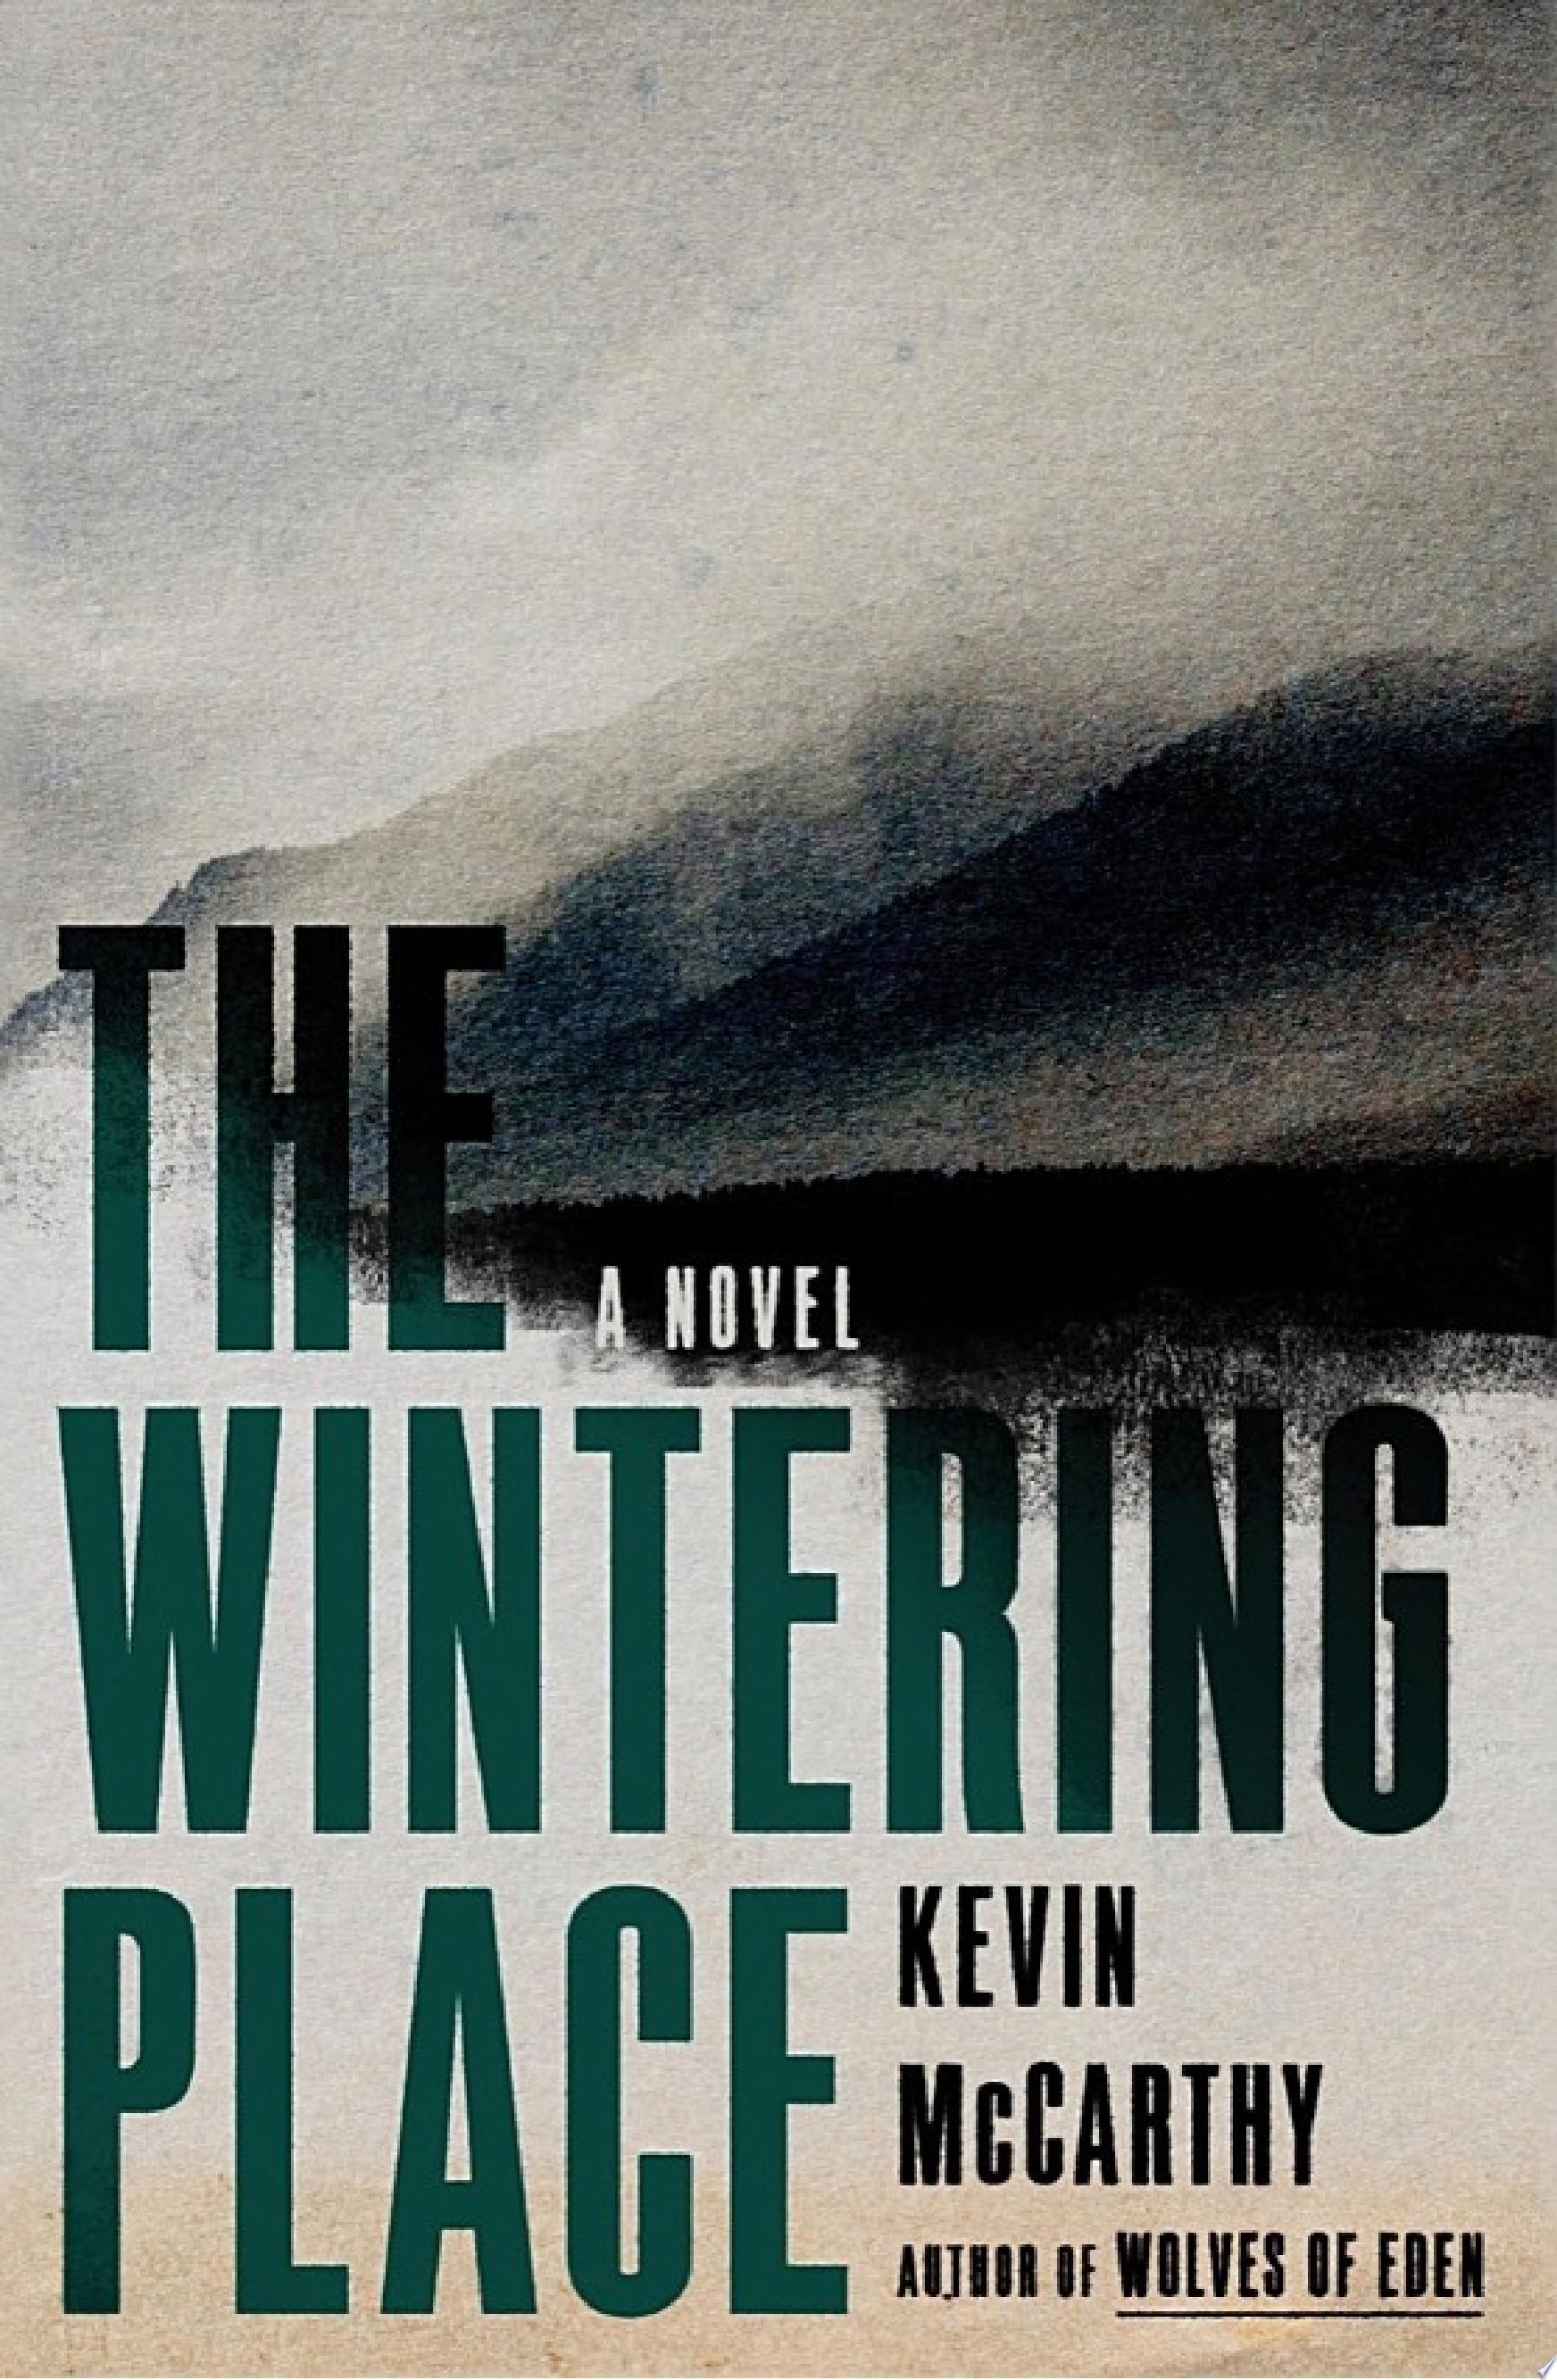 Image for "The Wintering Place: A Novel"